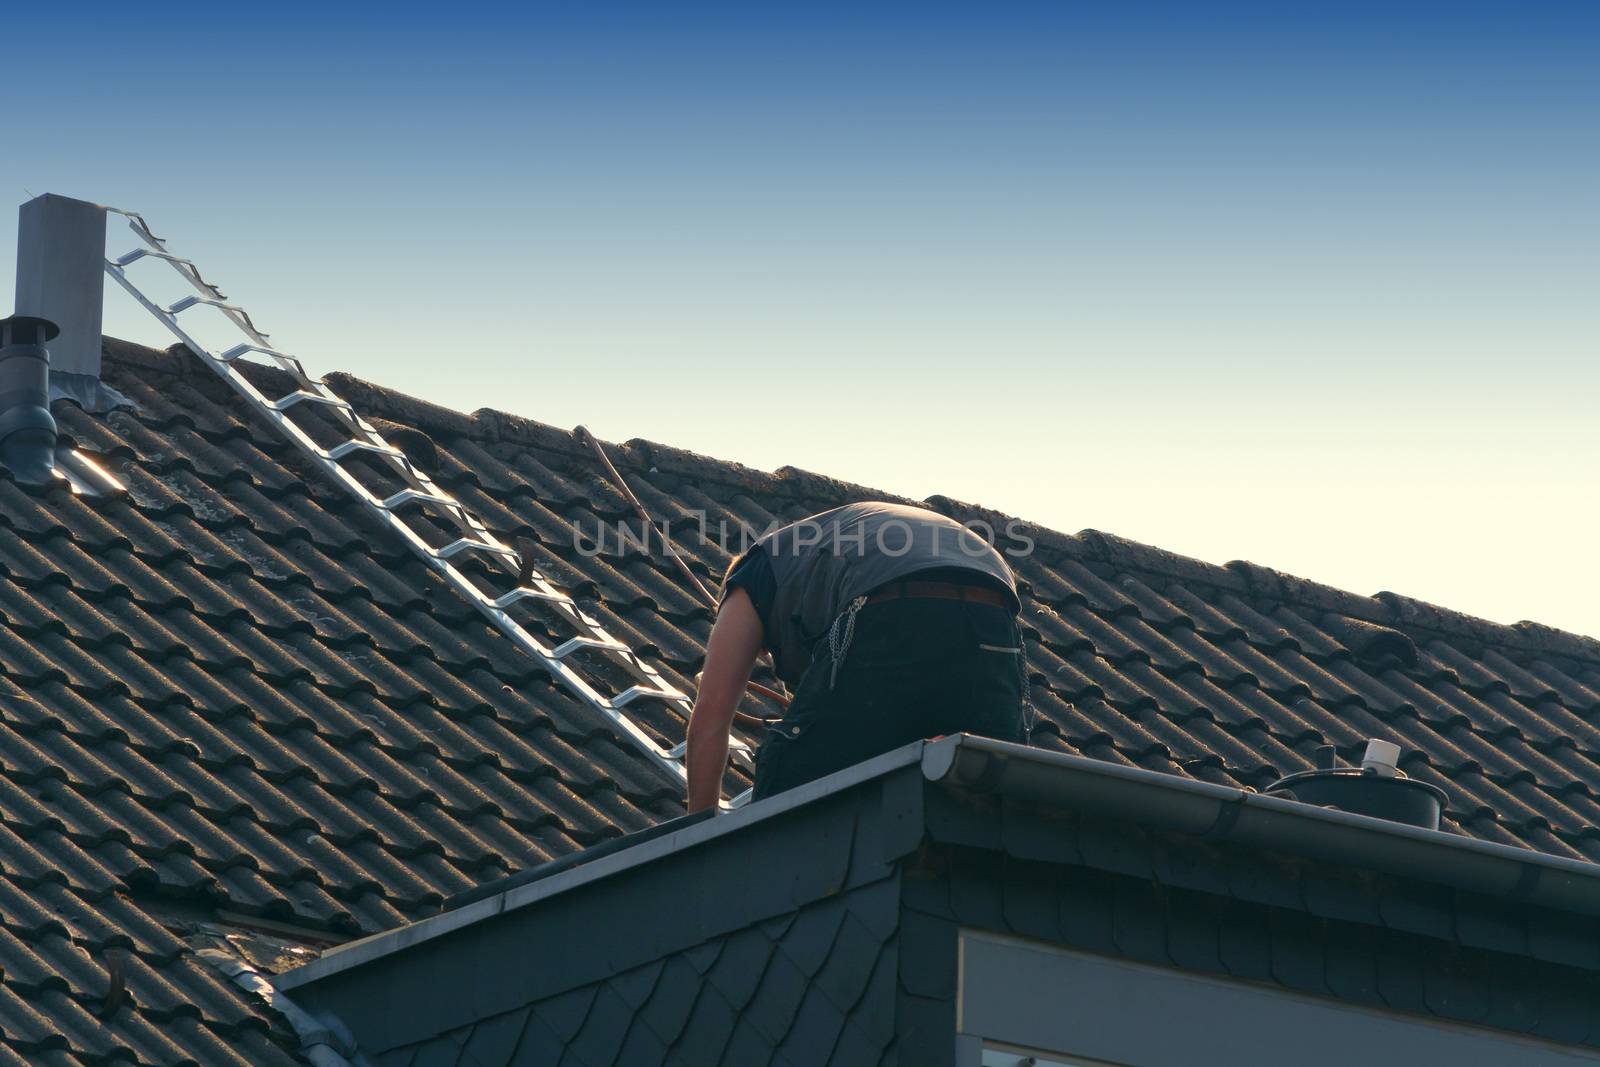 Roofer works on an unfinished roof. Installs roof shingles